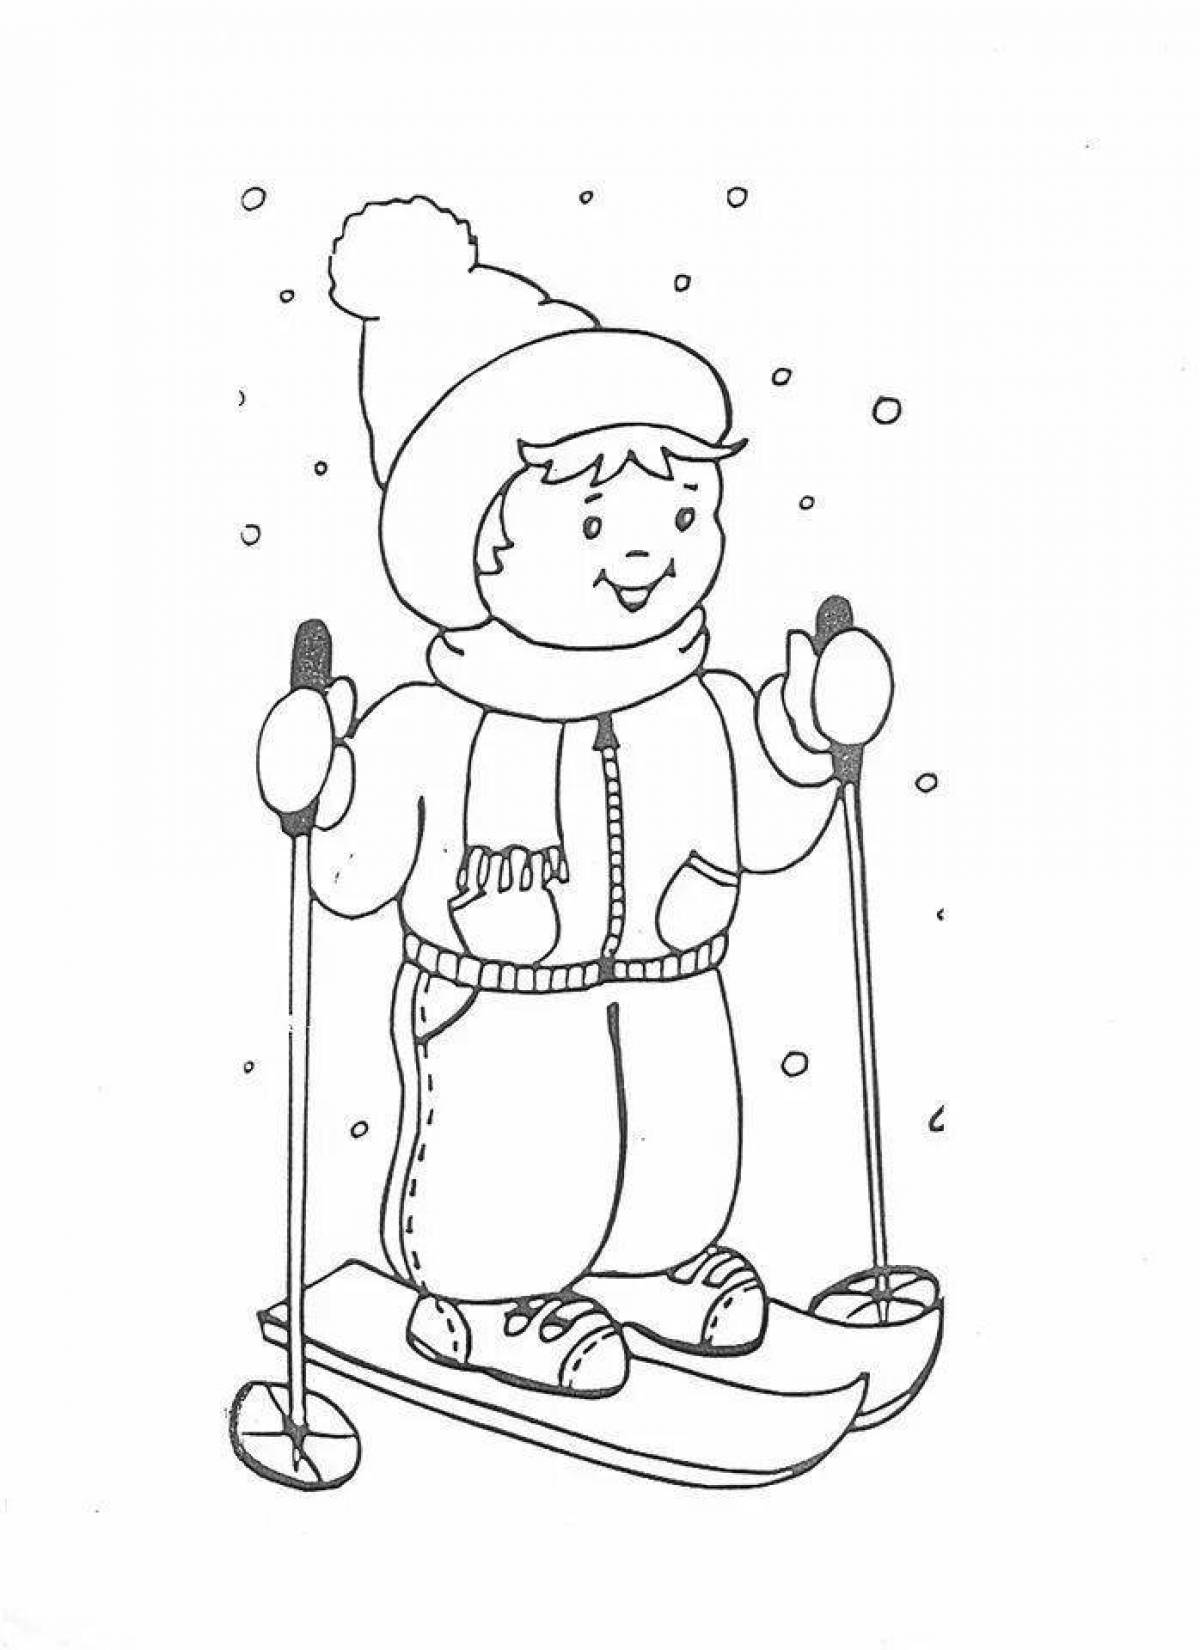 Sweet winter coloring for children 2-3 years old